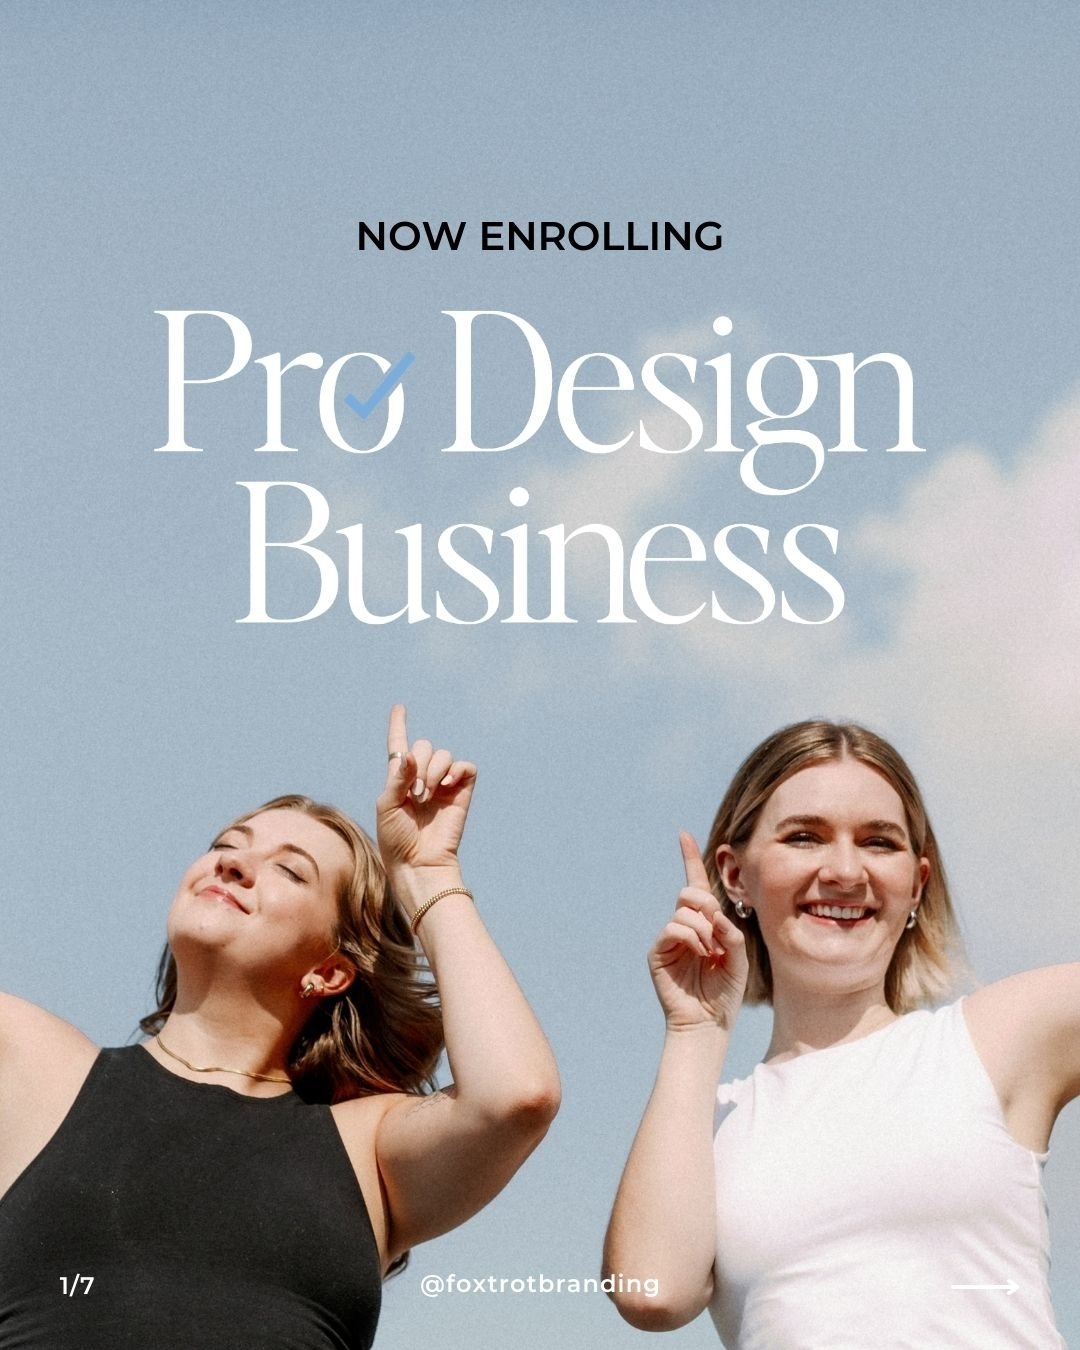 The program that's helped 240+ designers build their dream businesses, Pro Design Business, is NOW OPEN for enrollment! 🎉🎉🎉

Pro Design Business is the most comprehensive and easy-to-implement course for on-the-rise design entrepreneurs who want t